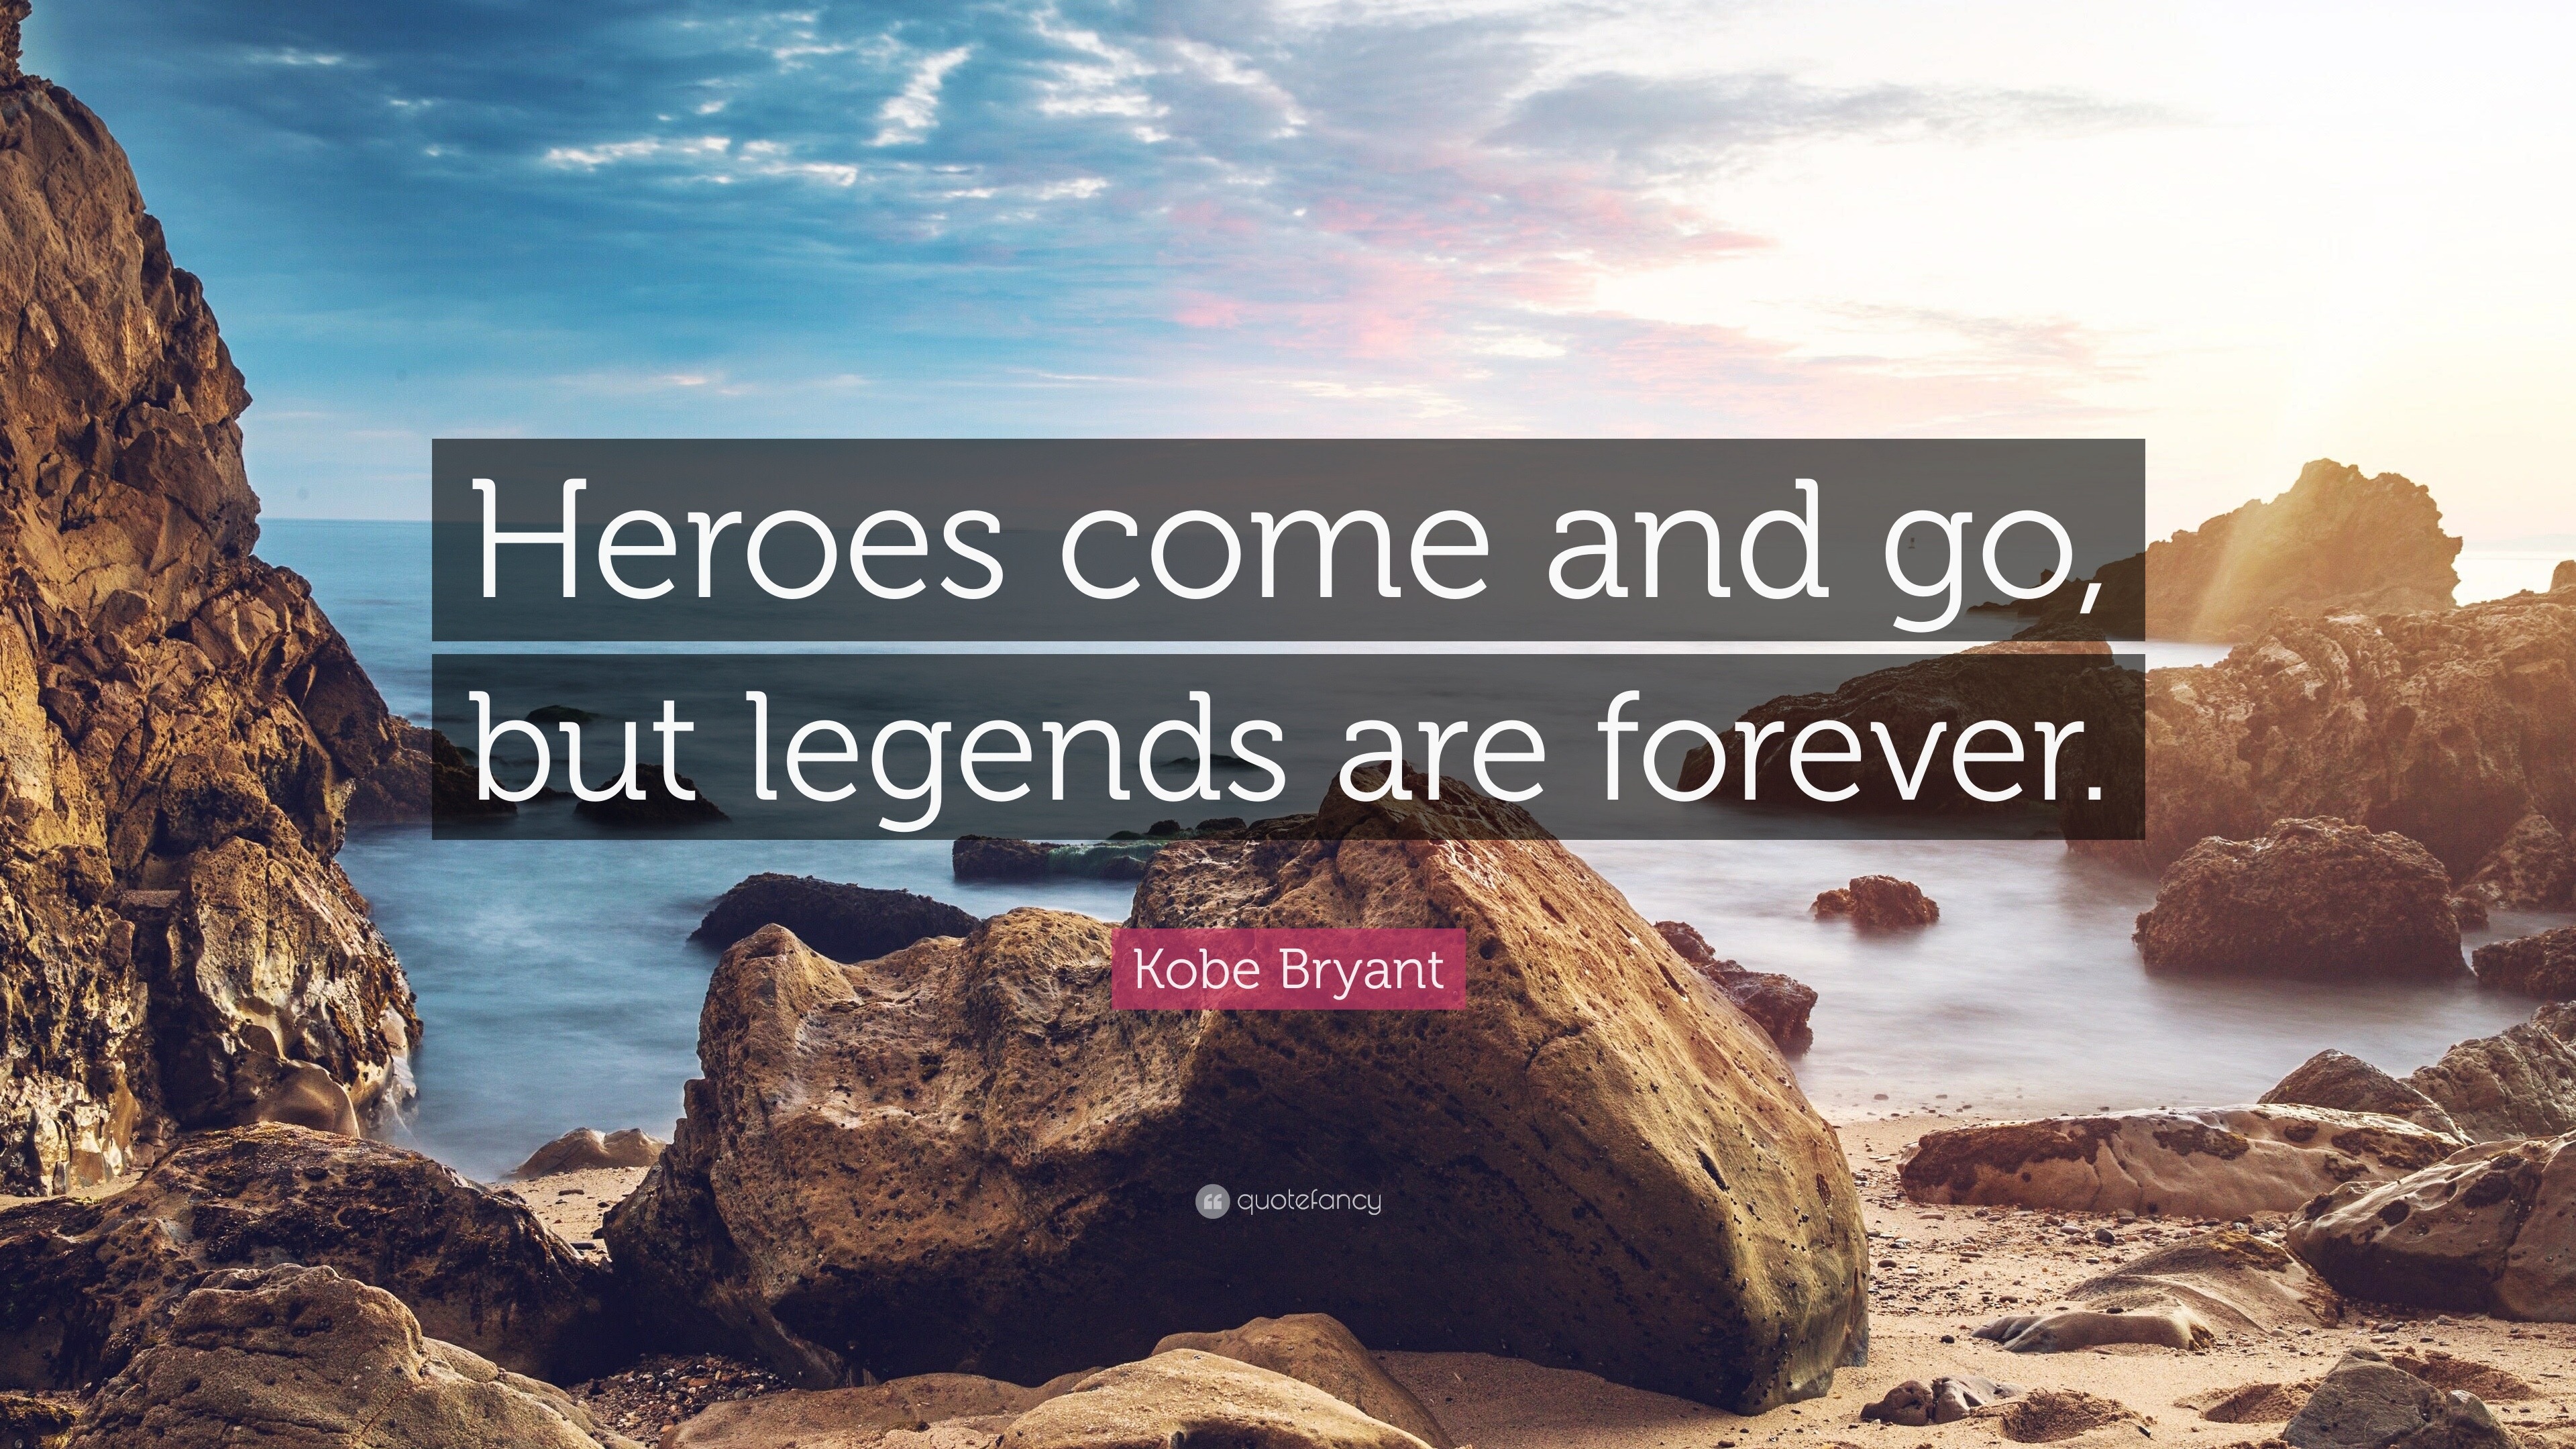 Heroes come and go, but legends live forever. Quickmart wishes to